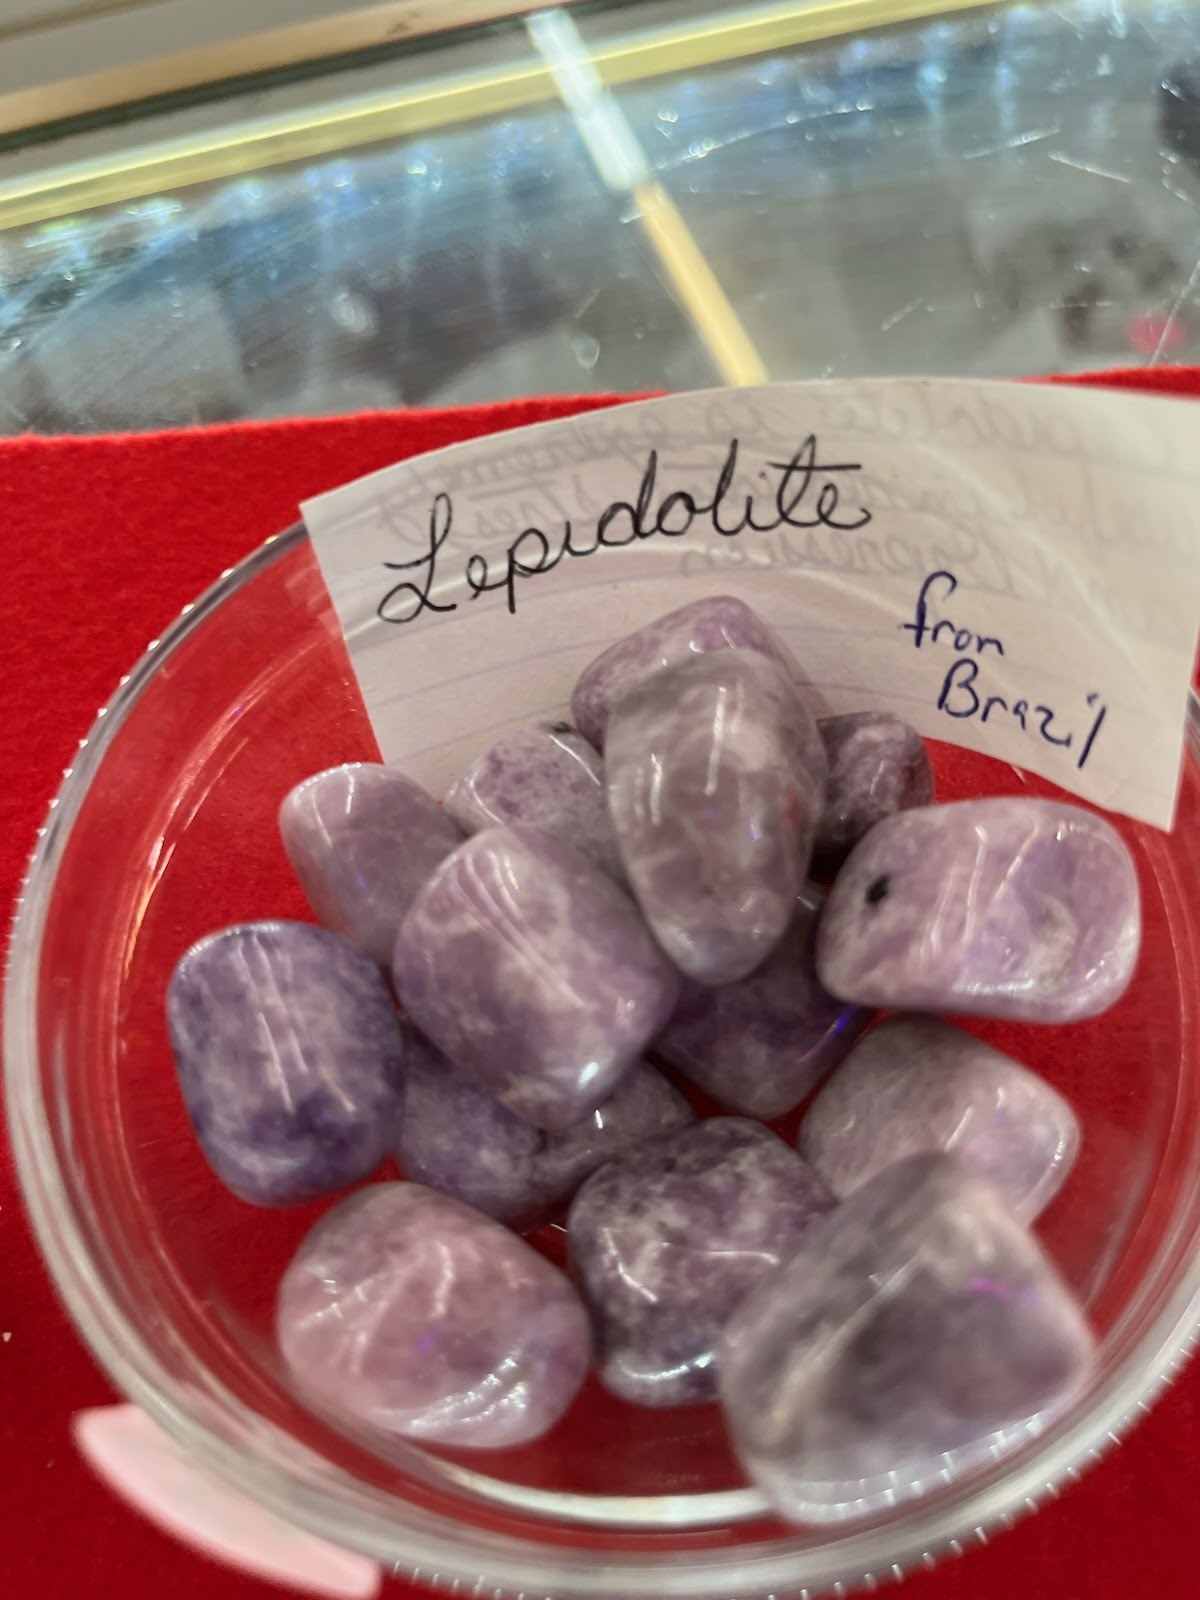 A bowl of purple and white rocks with a note on the side.